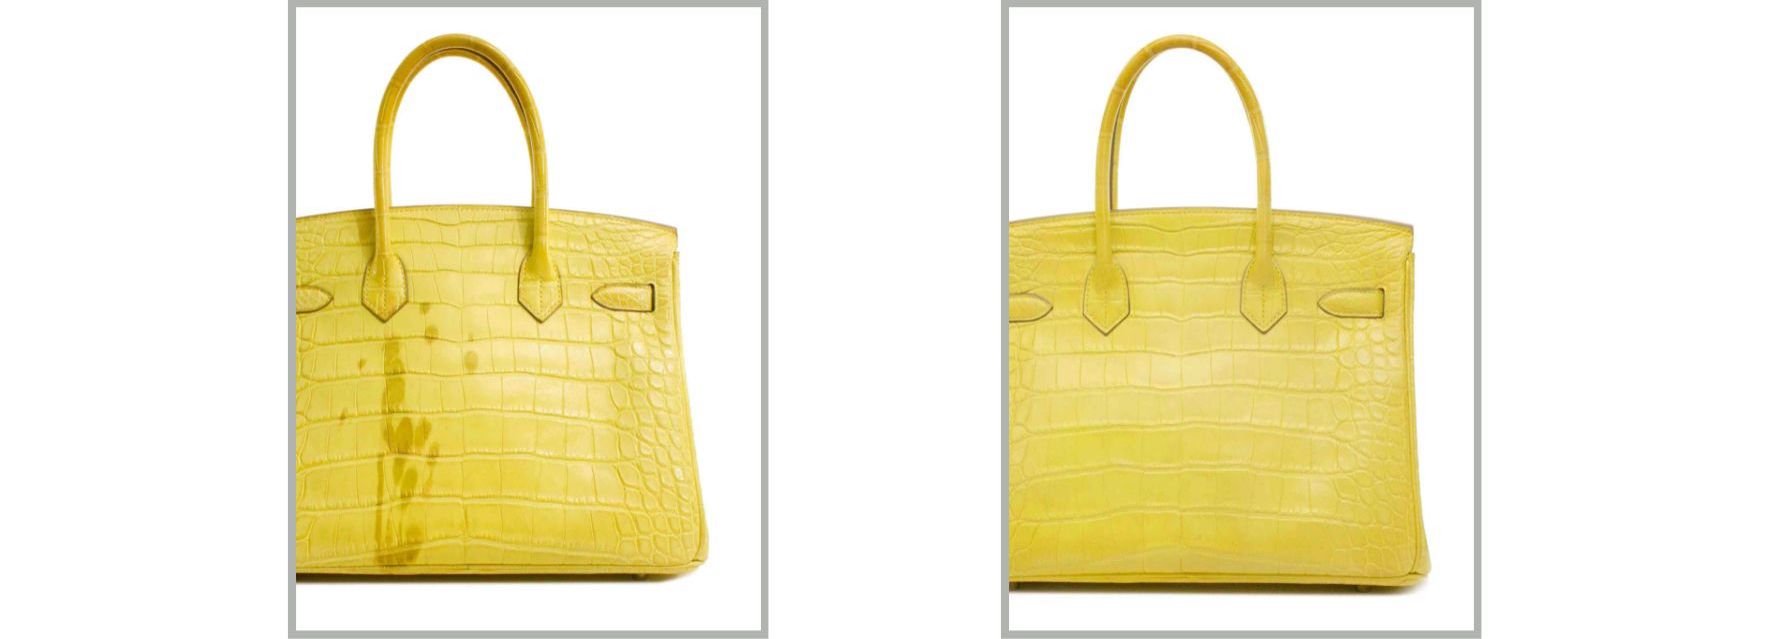 Discover how to get your bags Summer ready with The Handbag Clinic